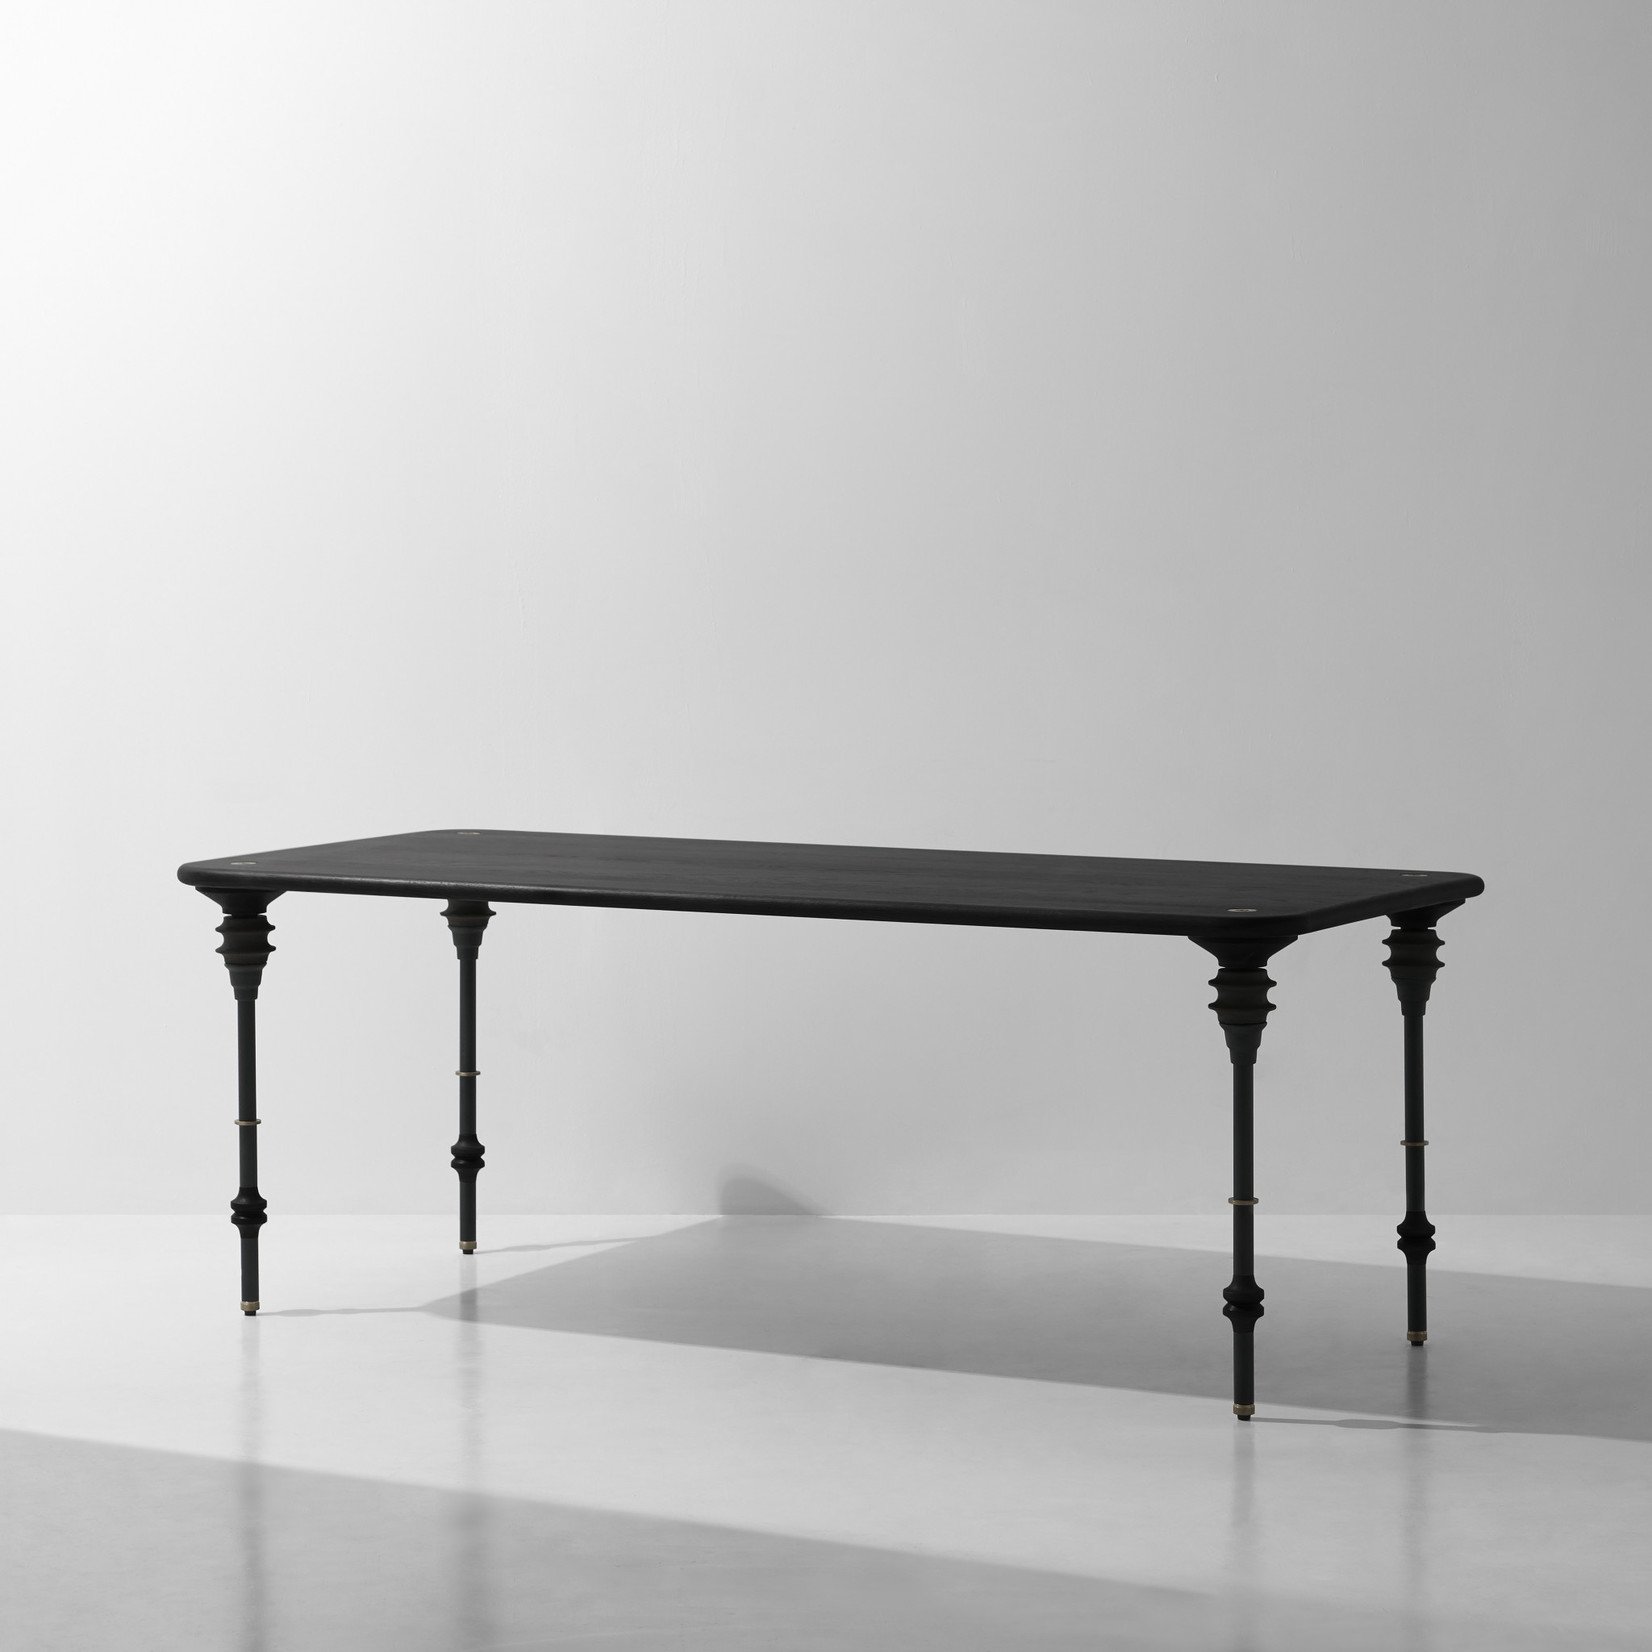 DISTRICT EIGHT DINING TABLE KIMBELL